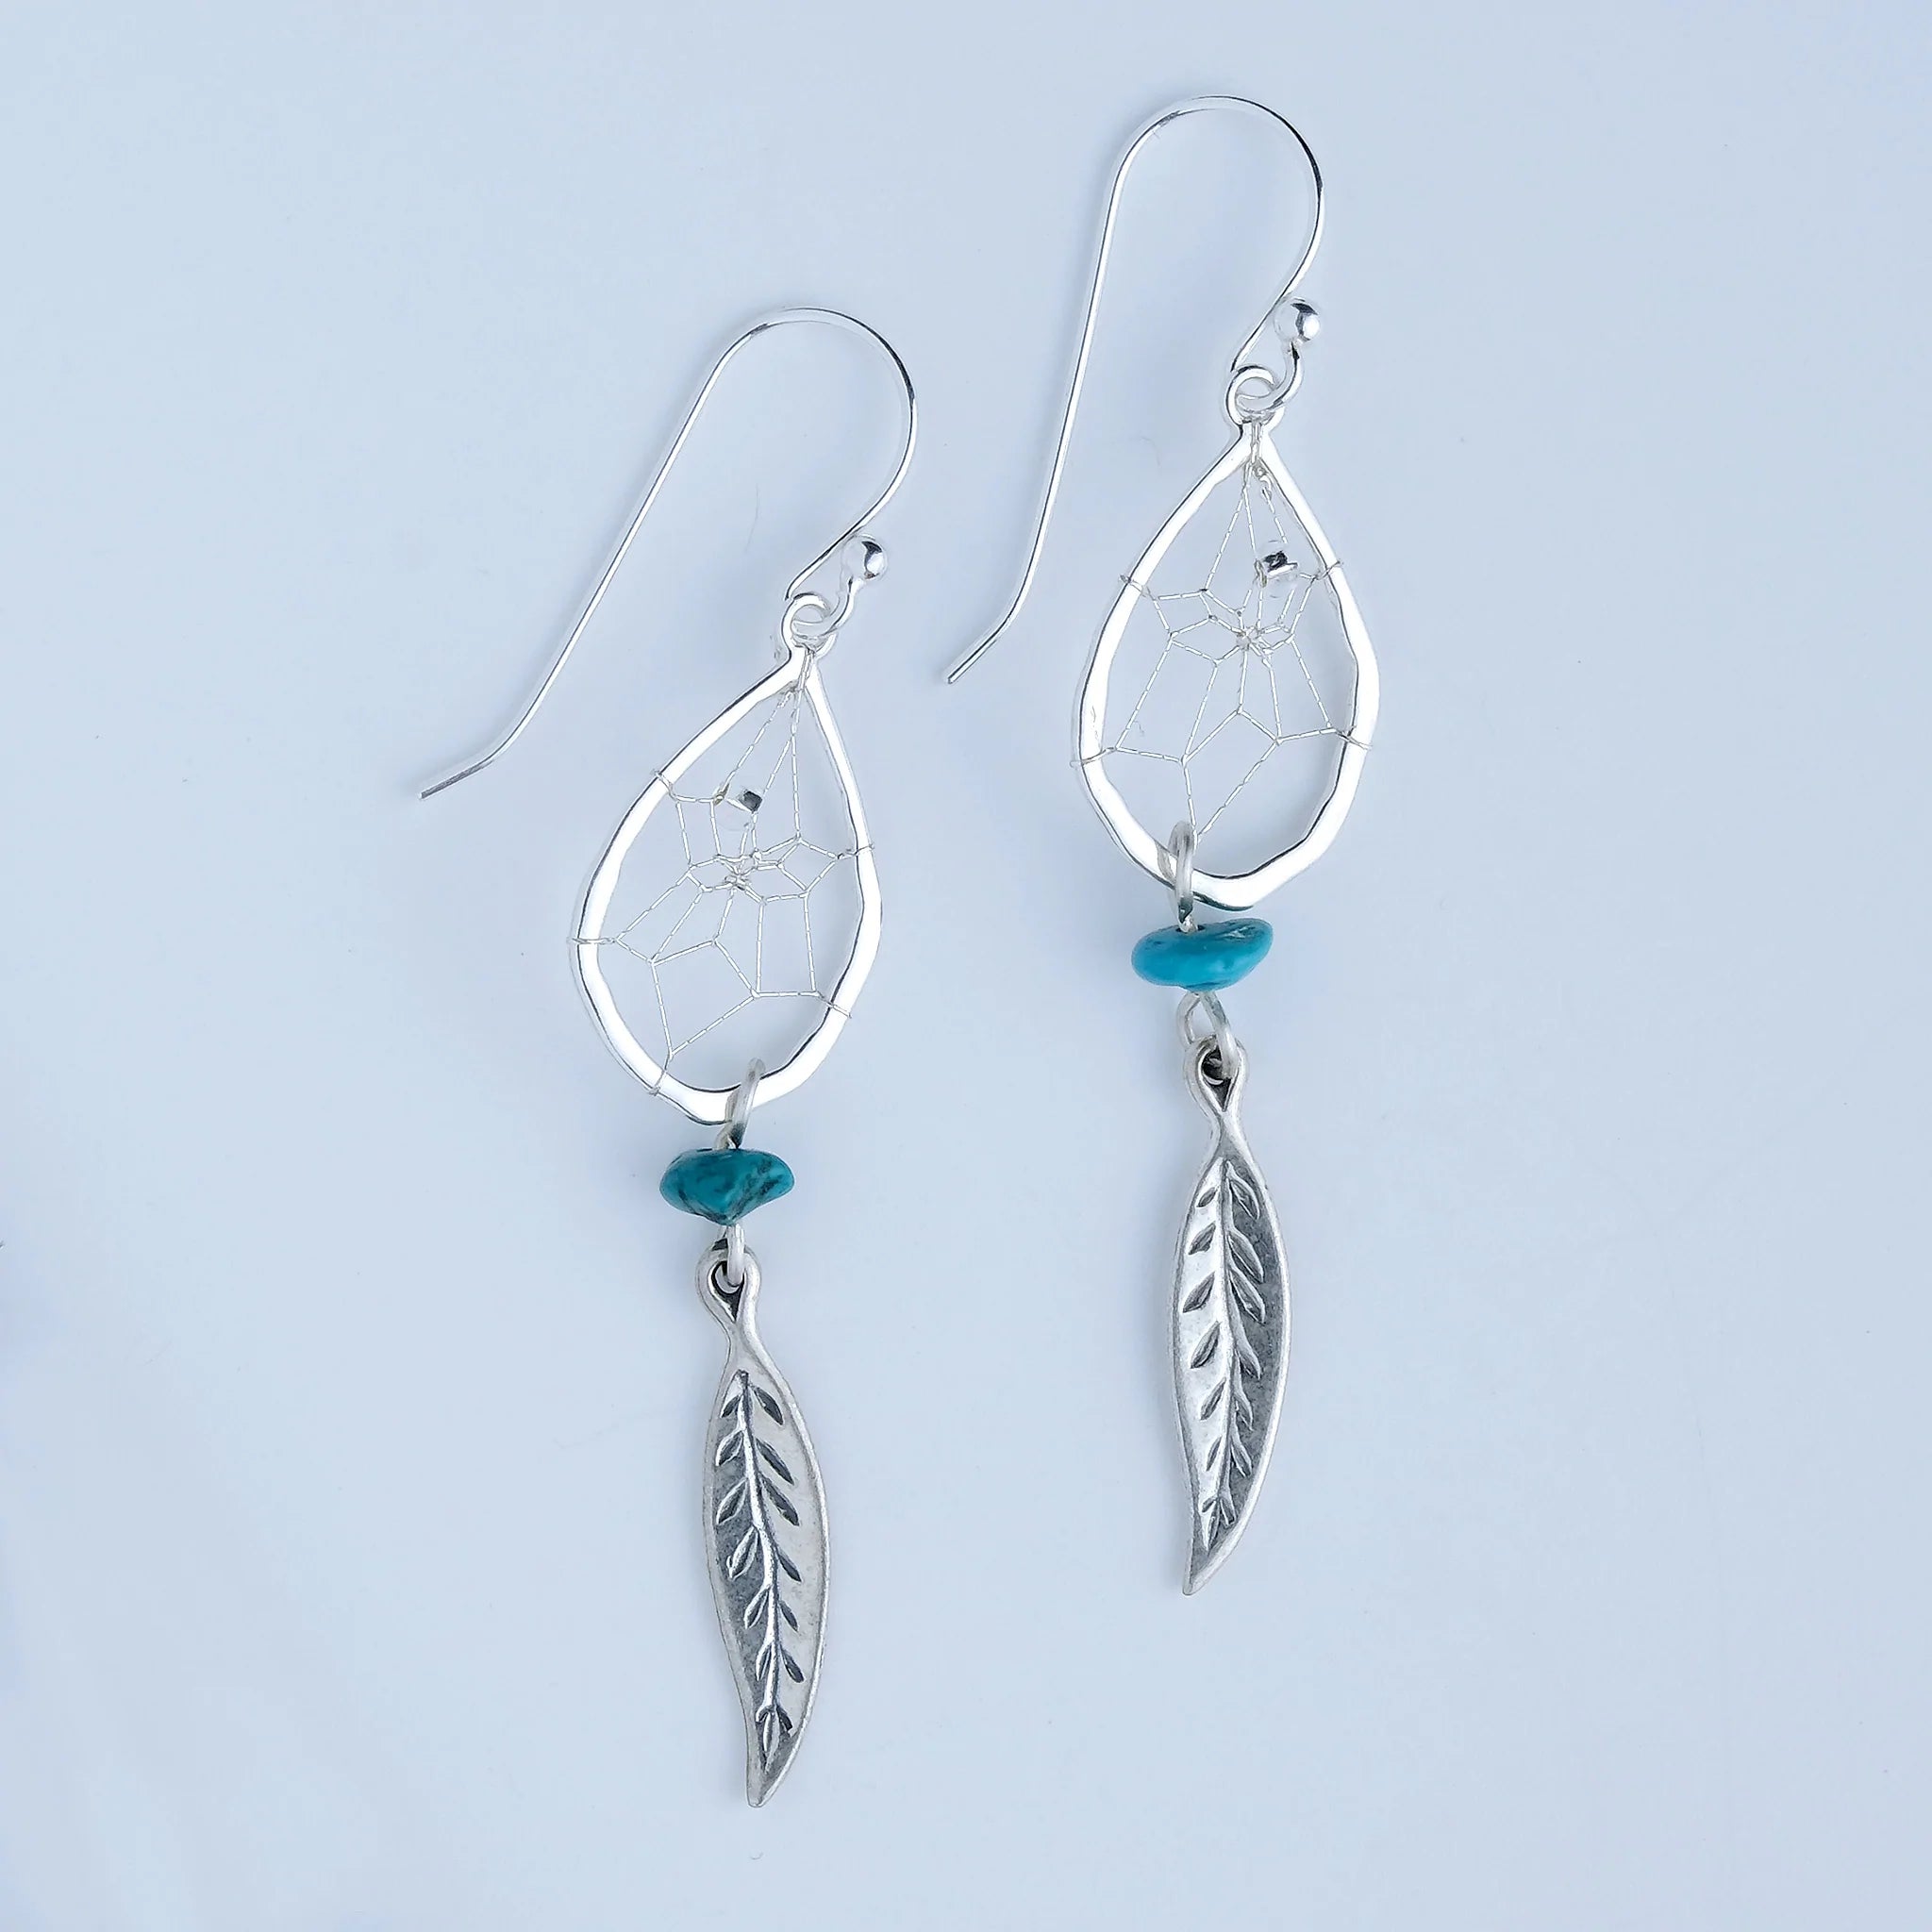 Silver Unique Dreamcatcher Earrings with Feather and Turquoise Stone